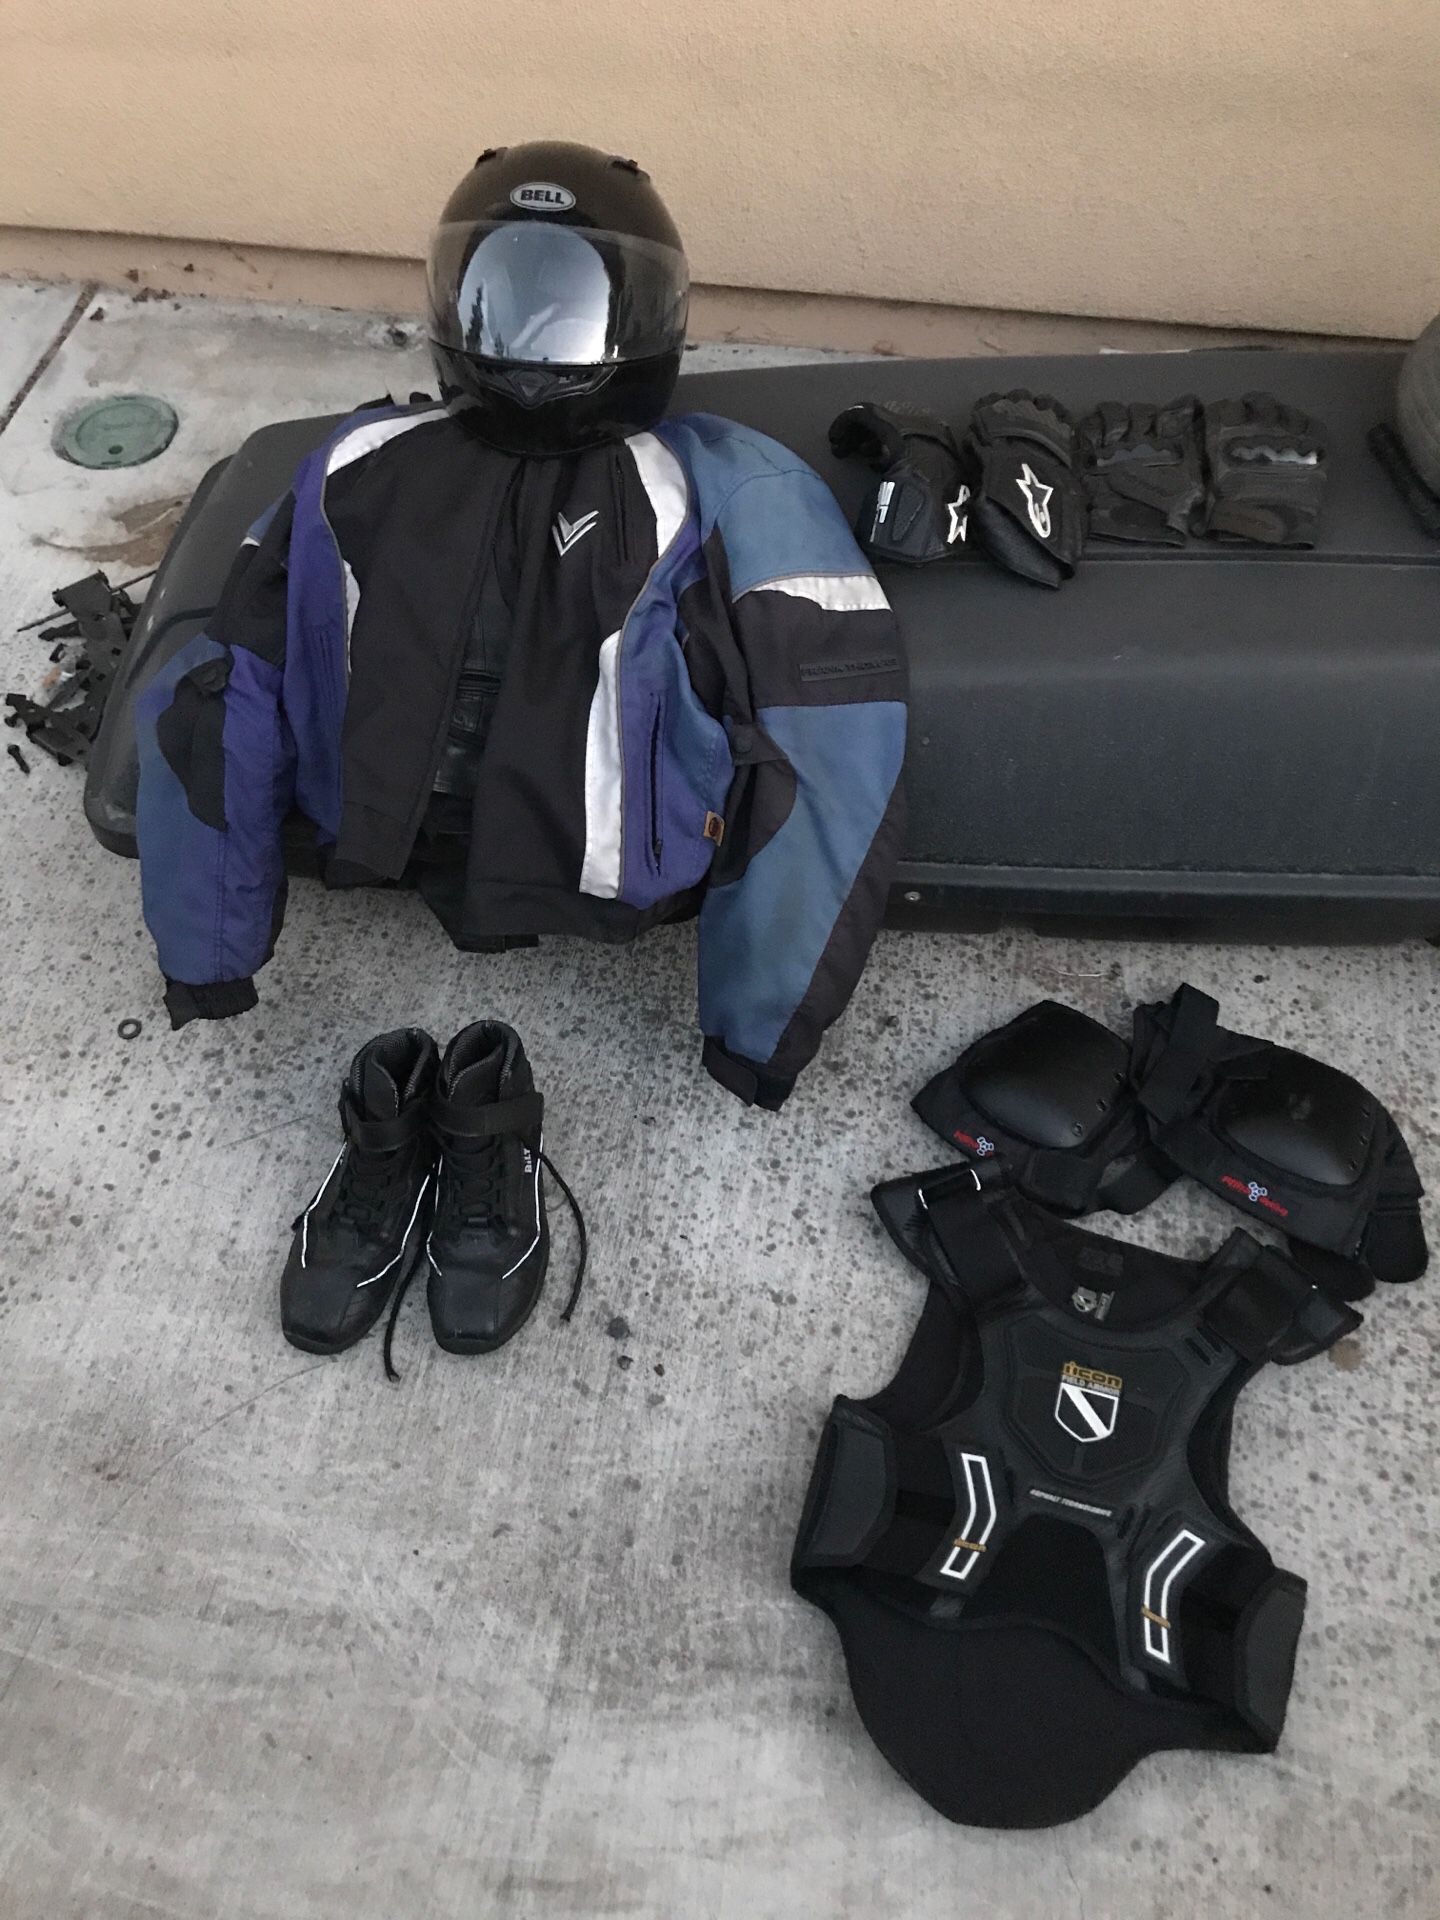 Complete motorcycle gear set. Best for man around 6ft.